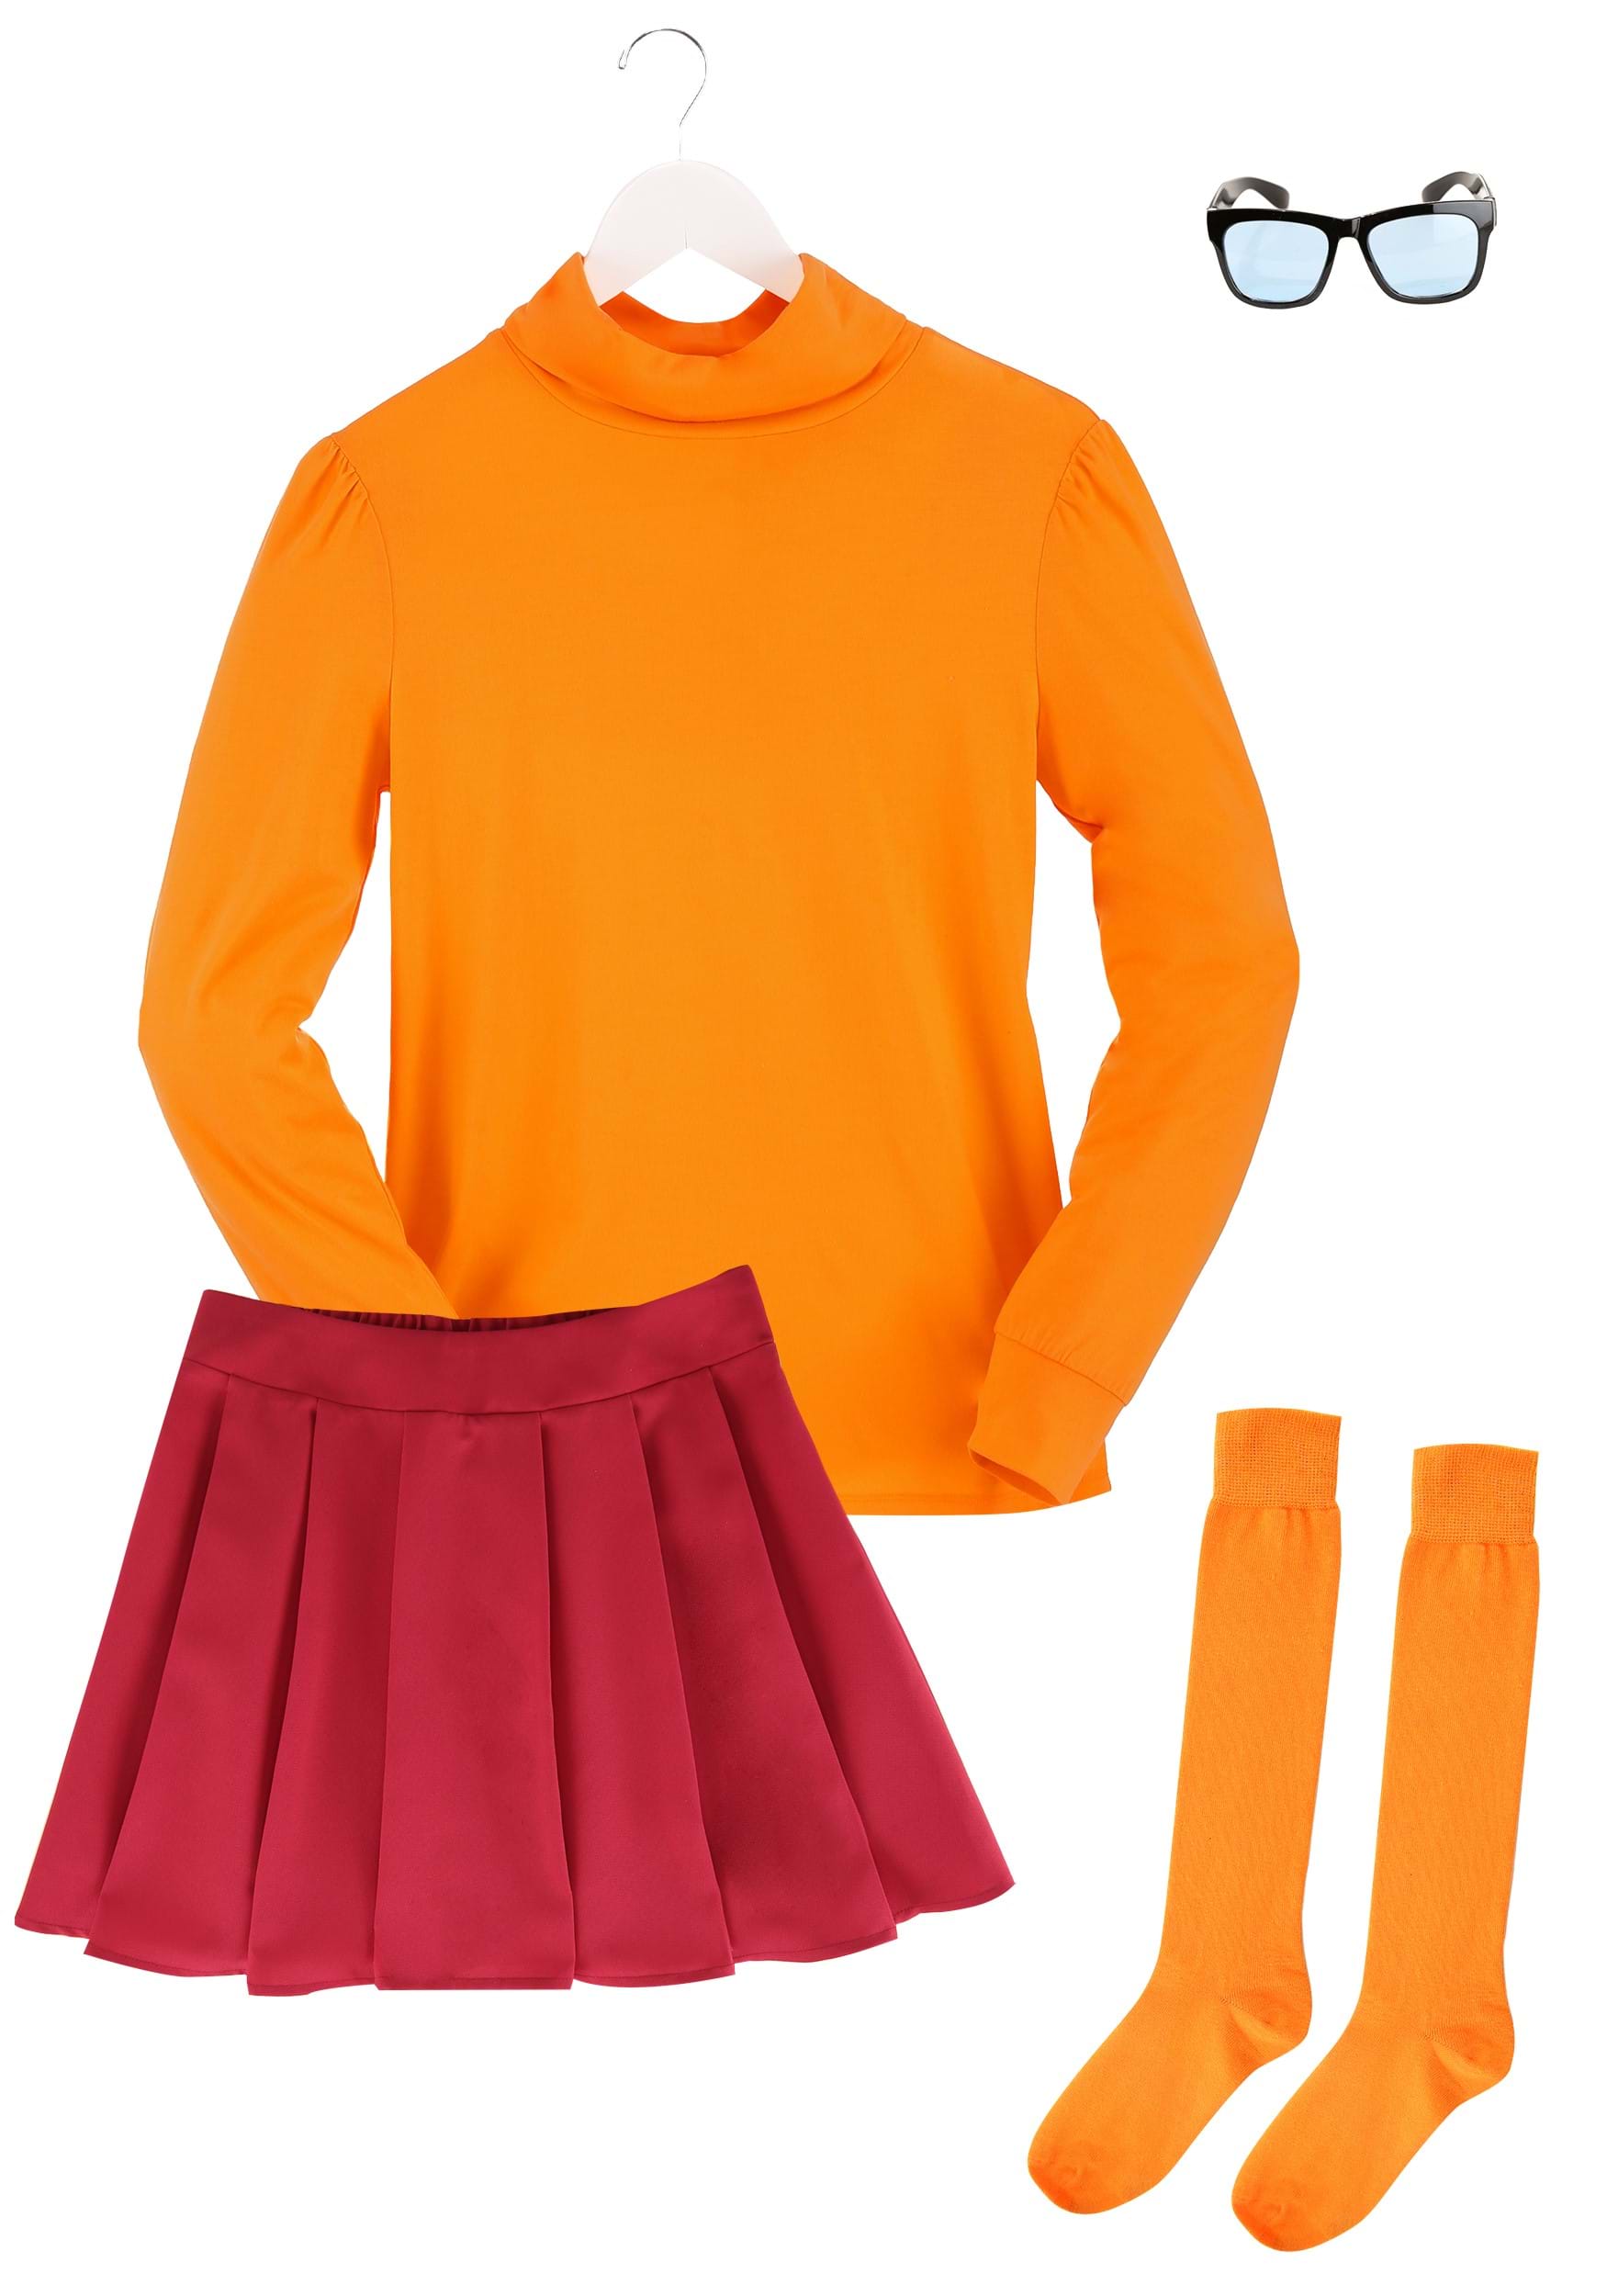  ZOKJFDK Velma Costume for Adult Women Halloween Classic Movie  Characters Costume Daphne Costume Adult Women for Cosplay : Clothing, Shoes